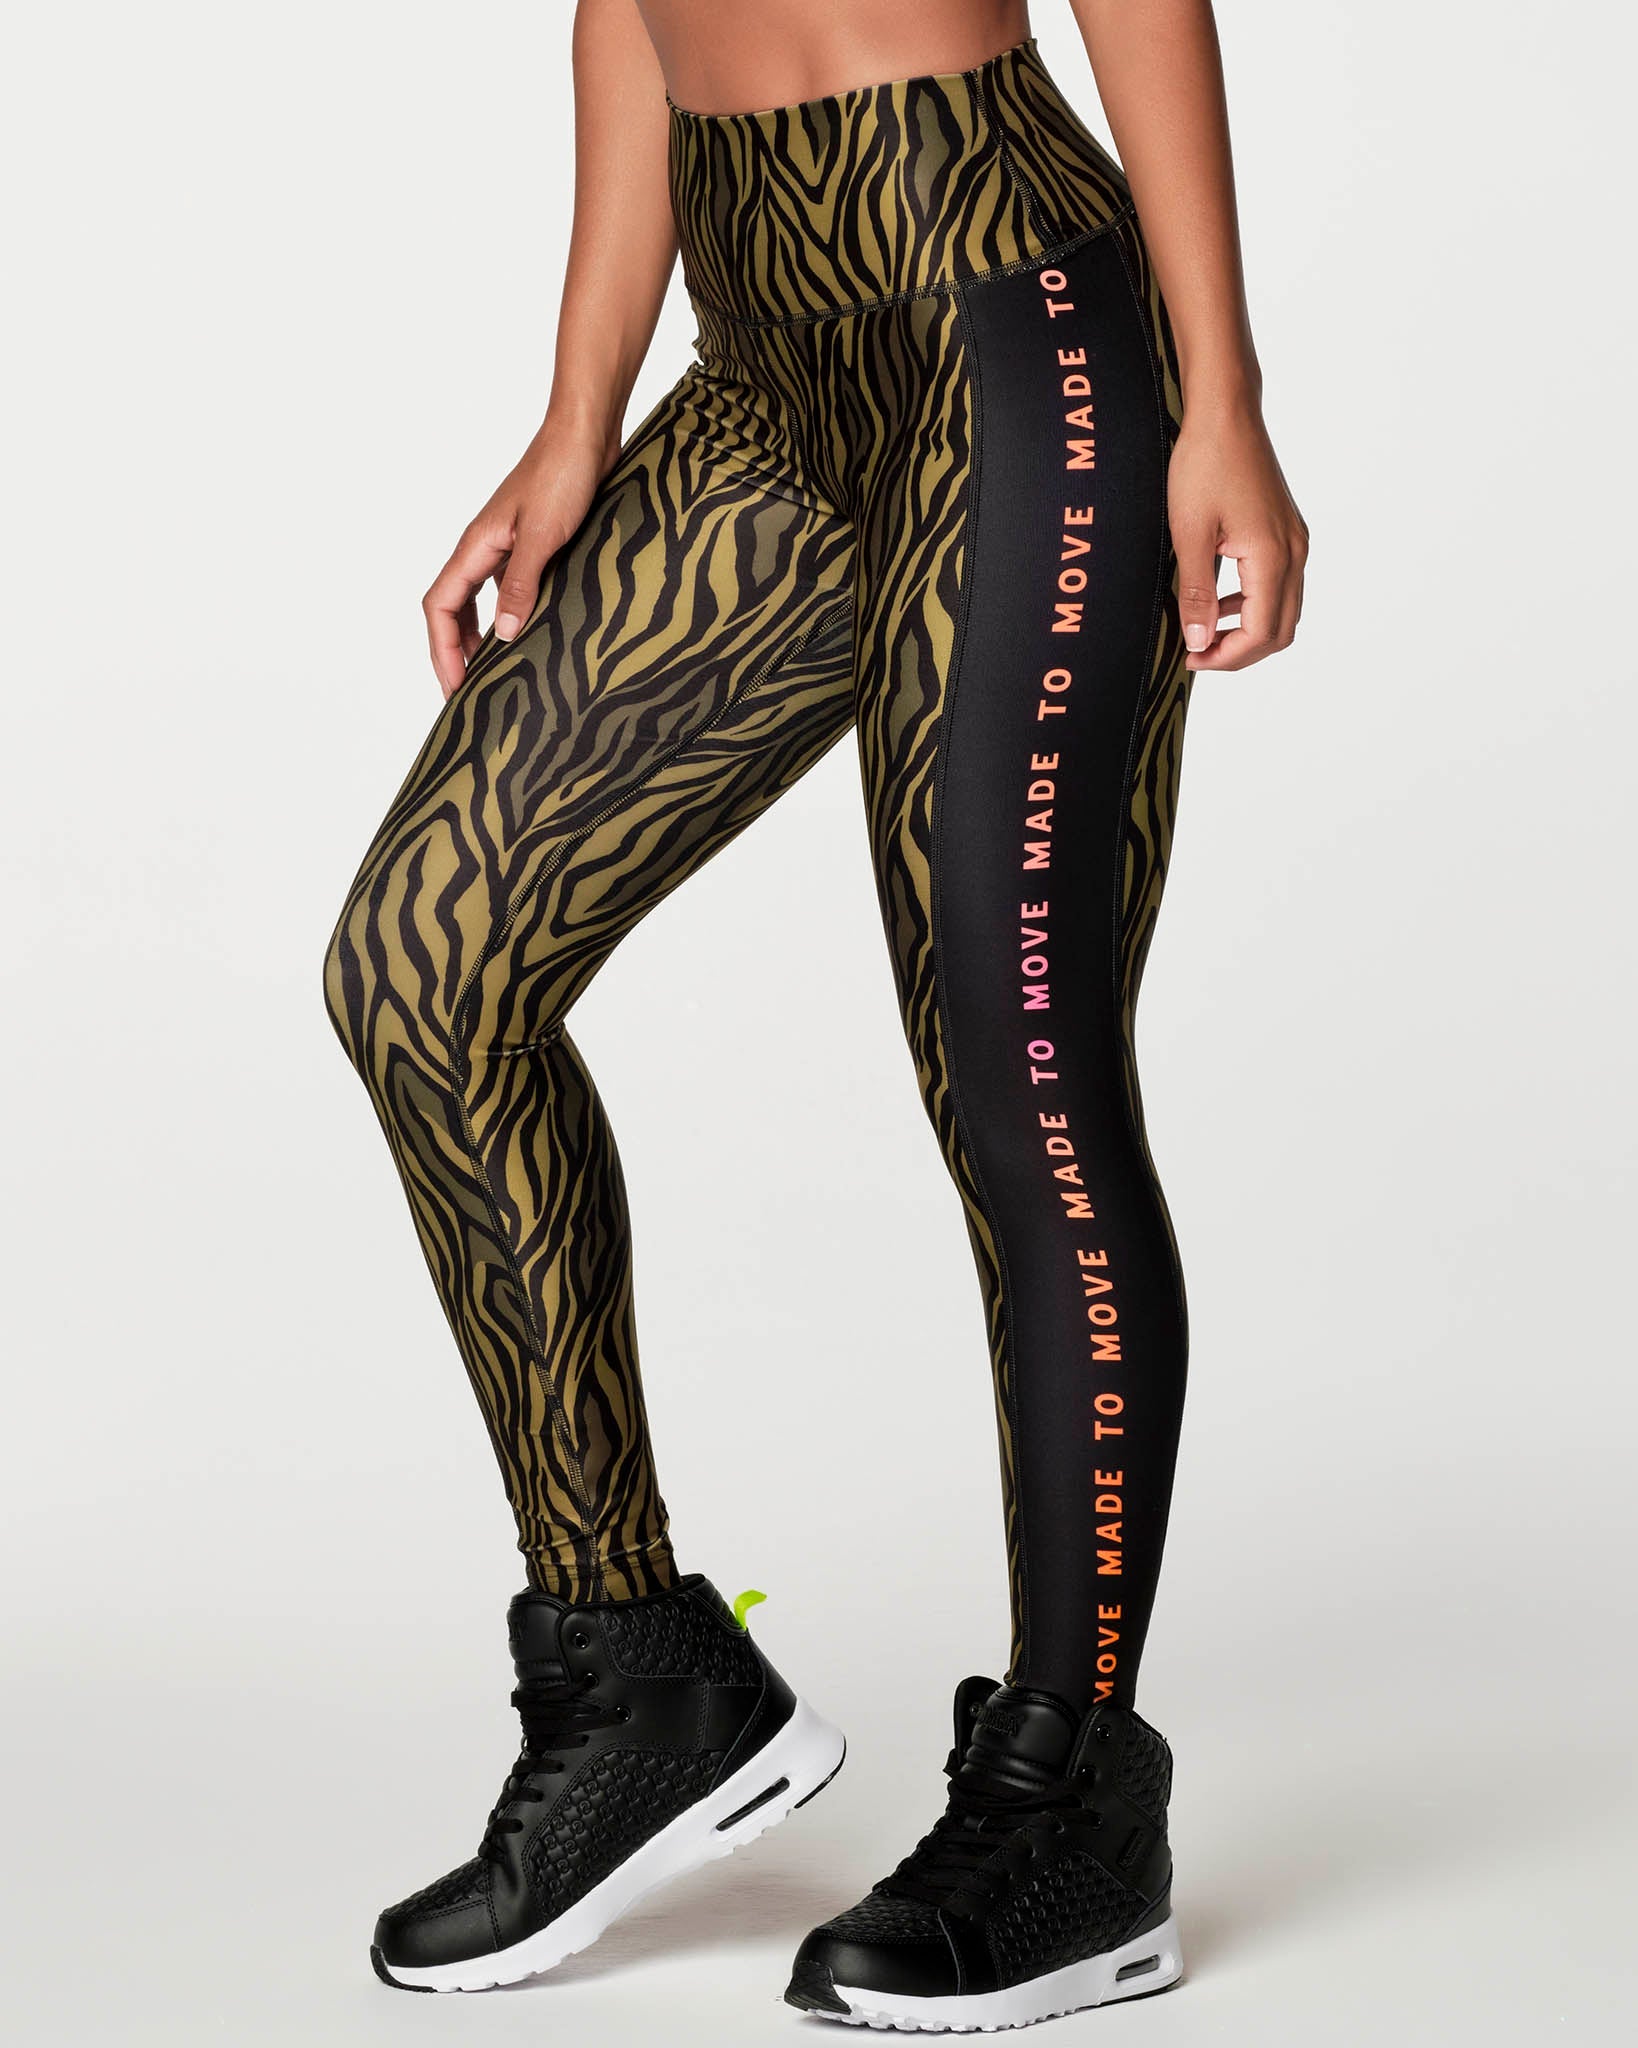 WILD Womens High Waisted Seamless Zebra Leopard Joga Leggings Womens  Fitness Leggings For Gym And Workout Nylon From Dacai1, $15.41